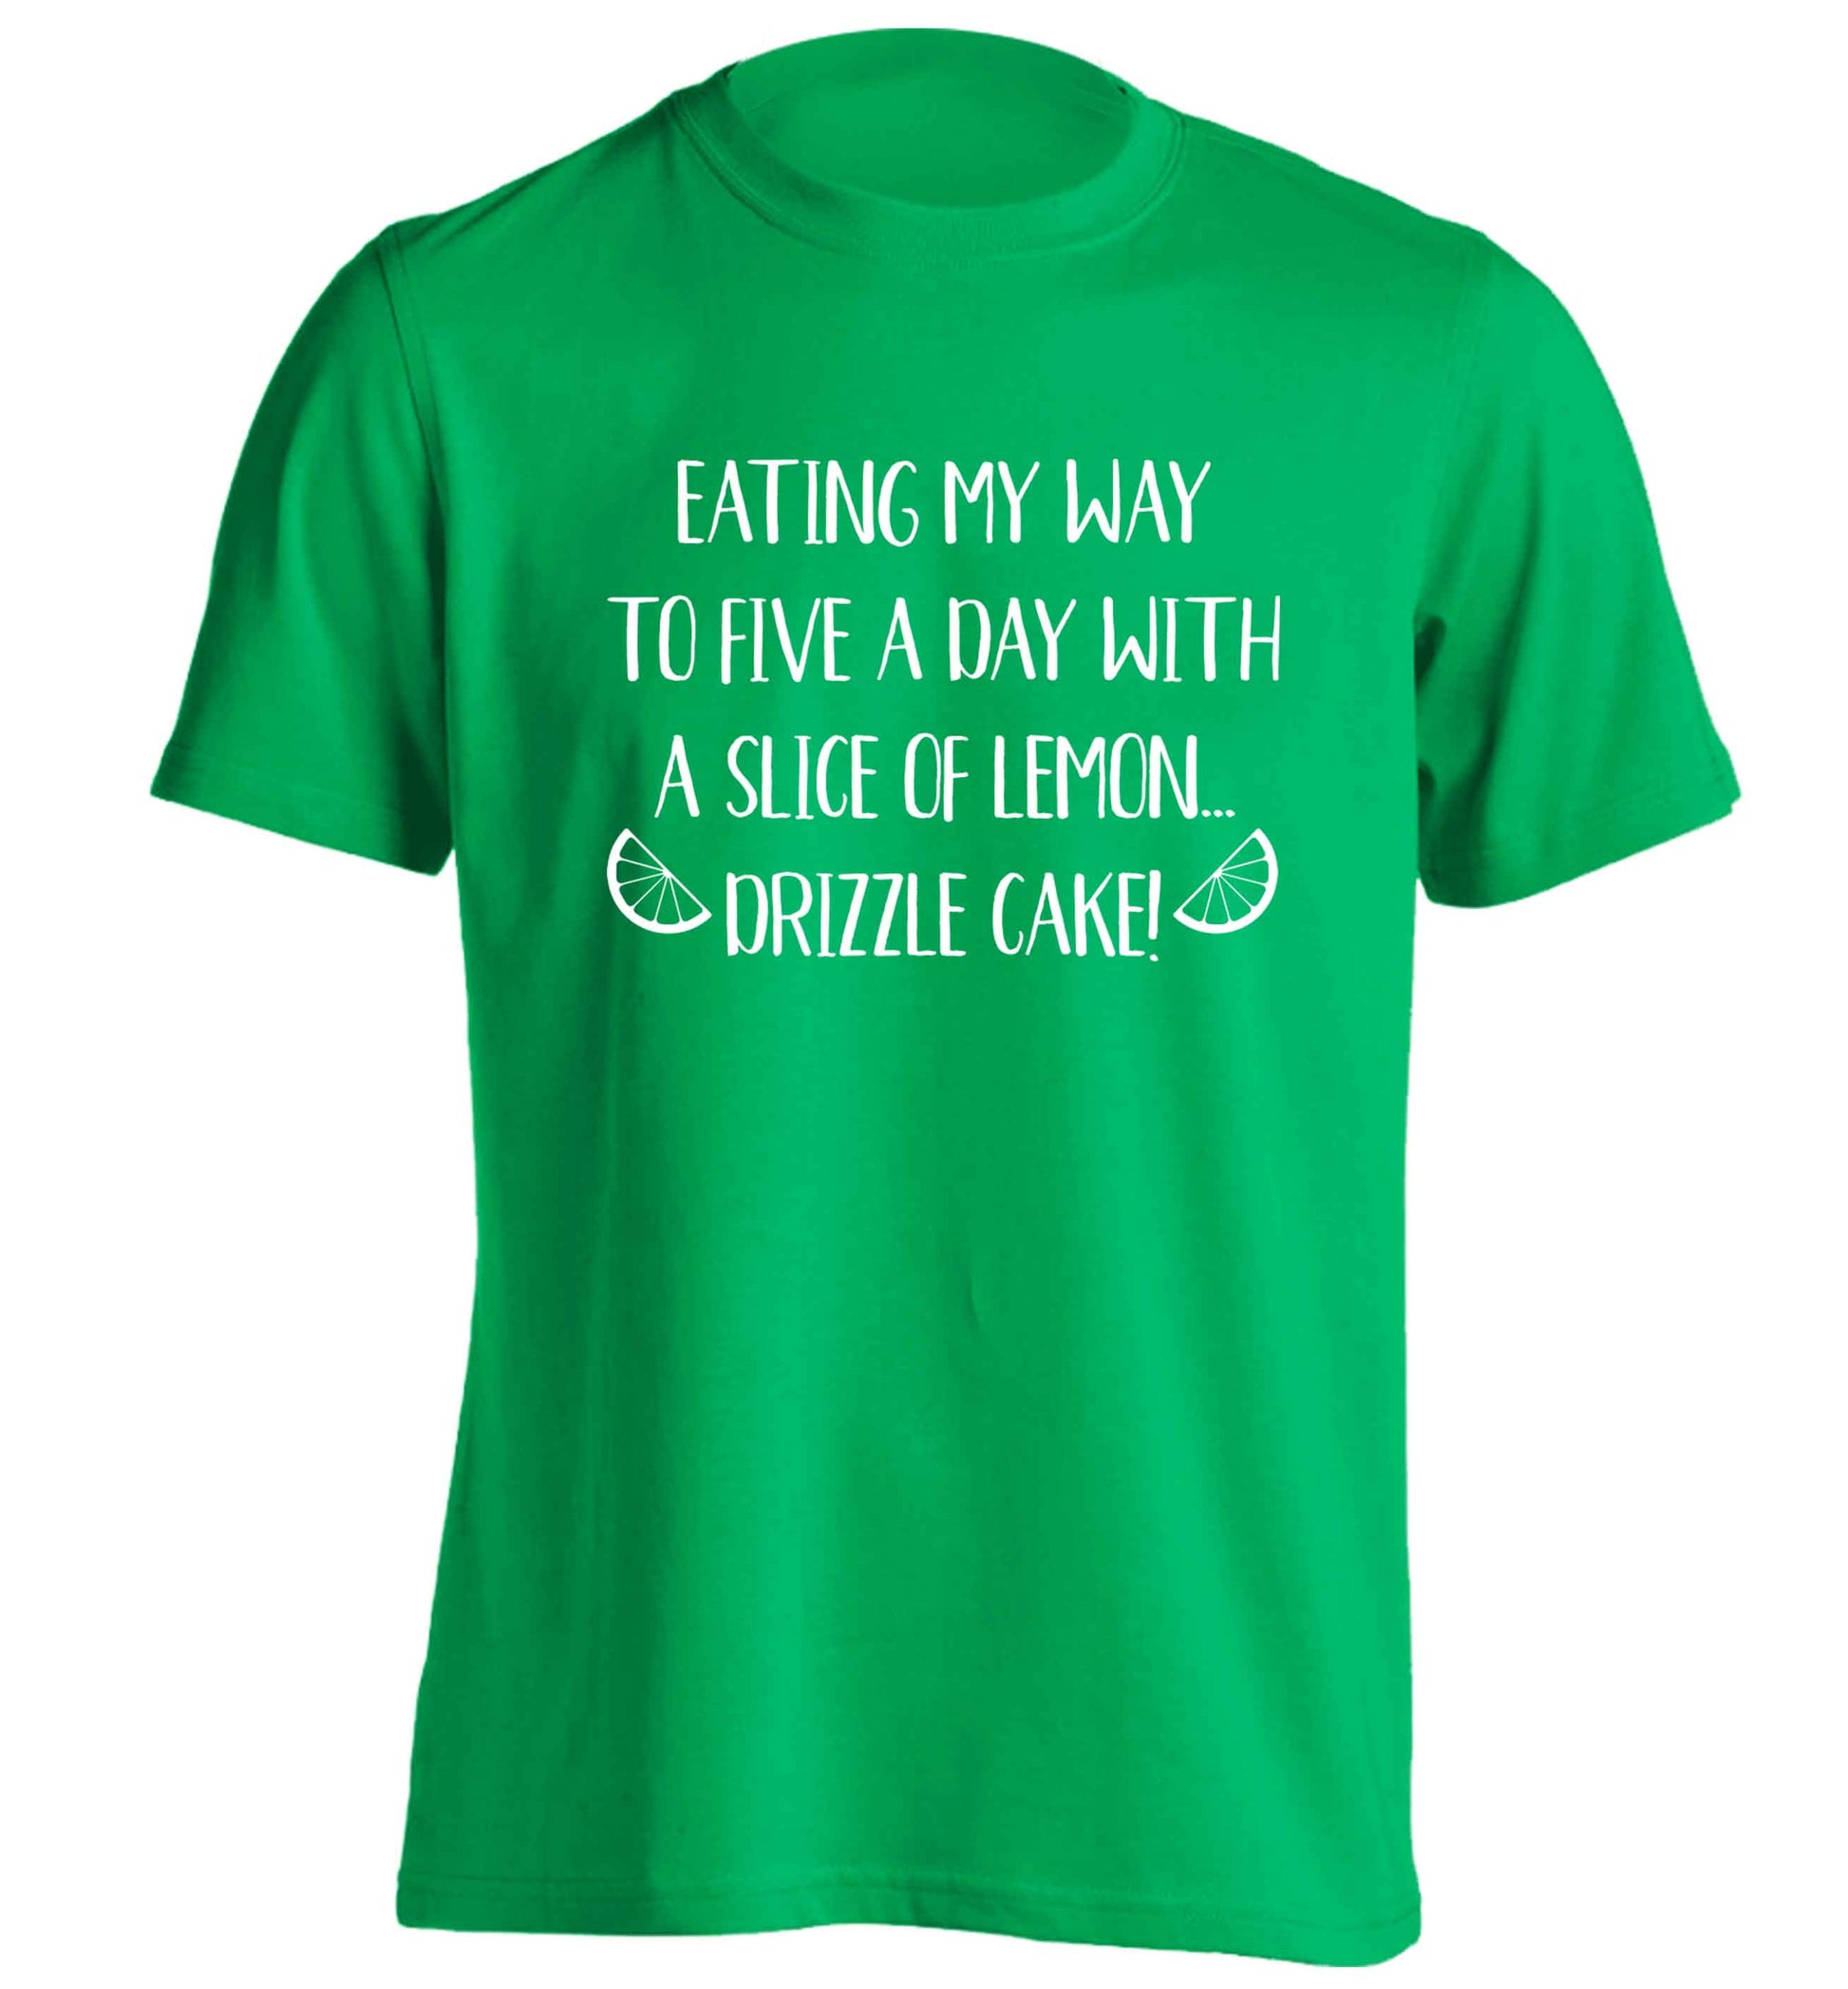 Eating my way to five a day with a slice of lemon drizzle cake day adults unisex green Tshirt 2XL